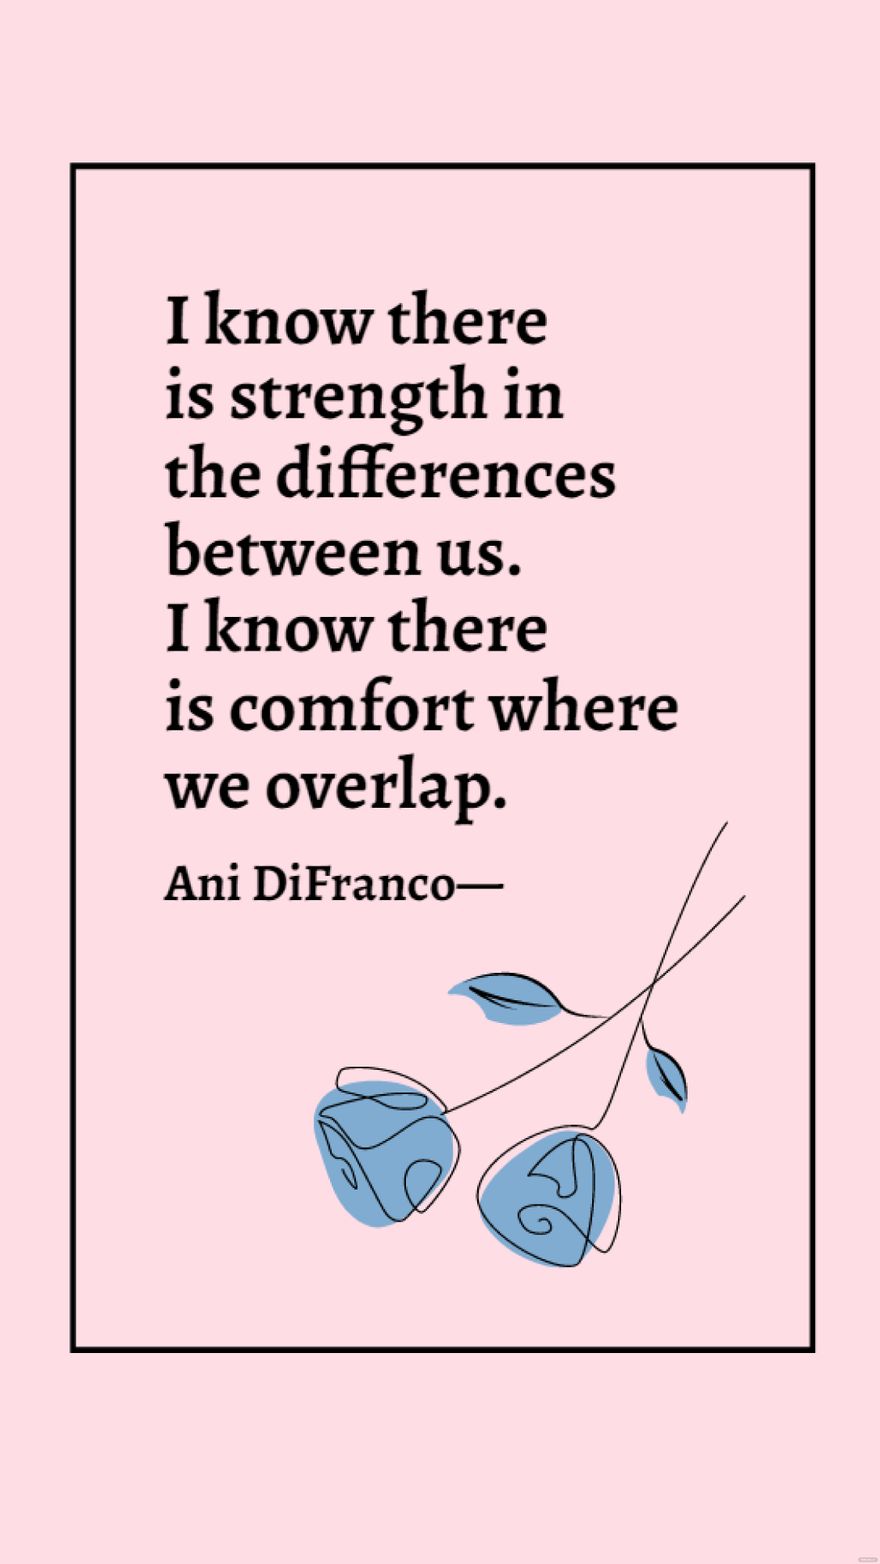 Ani DiFranco - I know there is strength in the differences between us. I know there is comfort where we overlap.